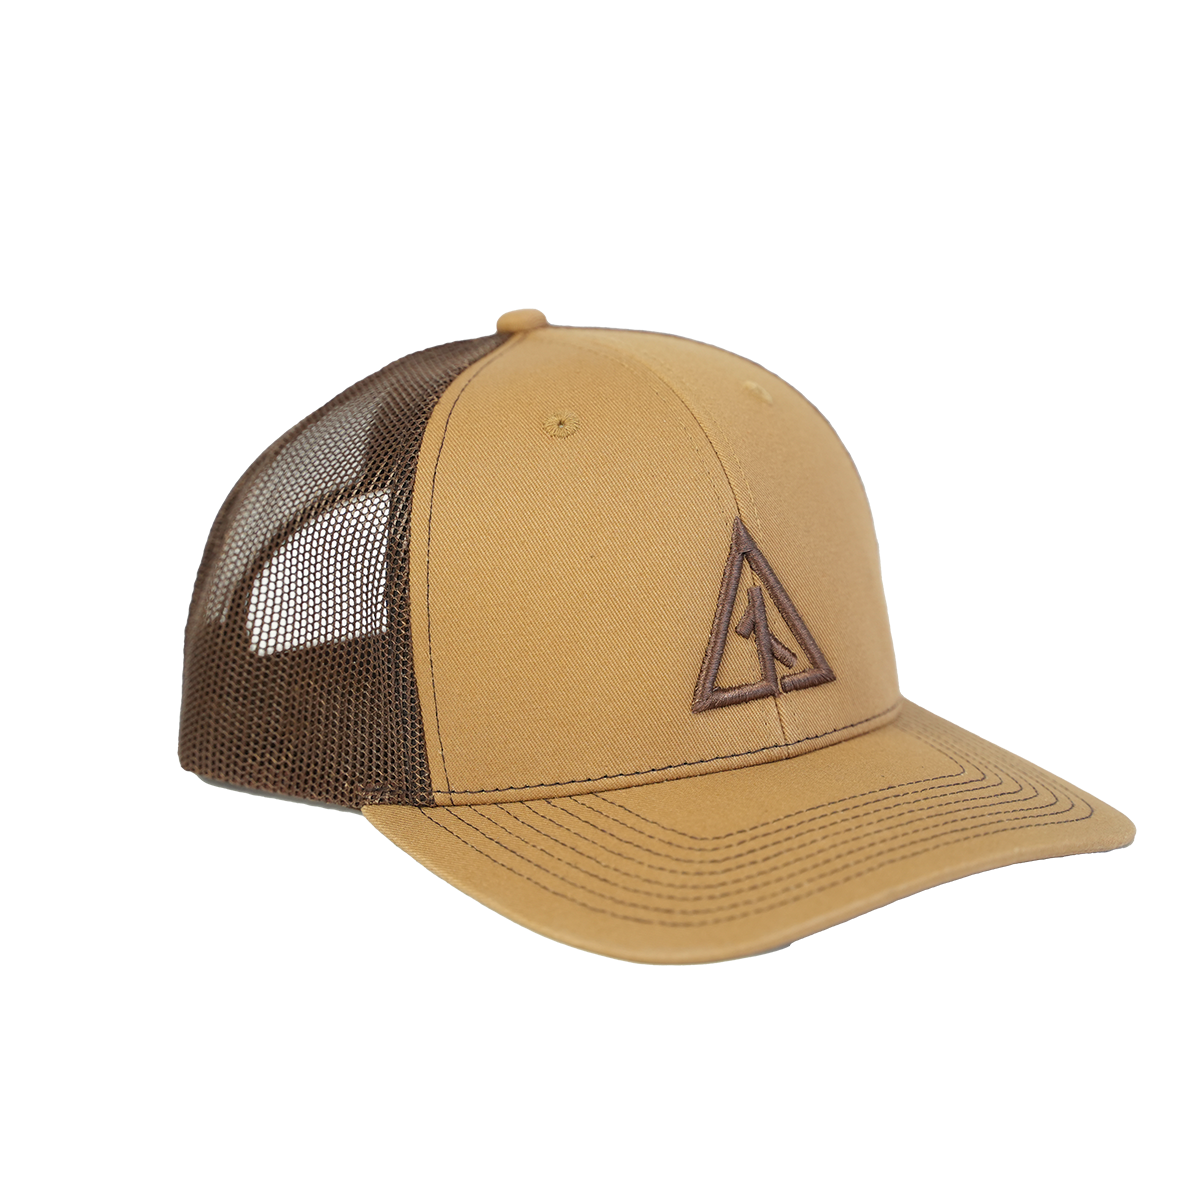 Stitched Icon Hat - Brown/Gold